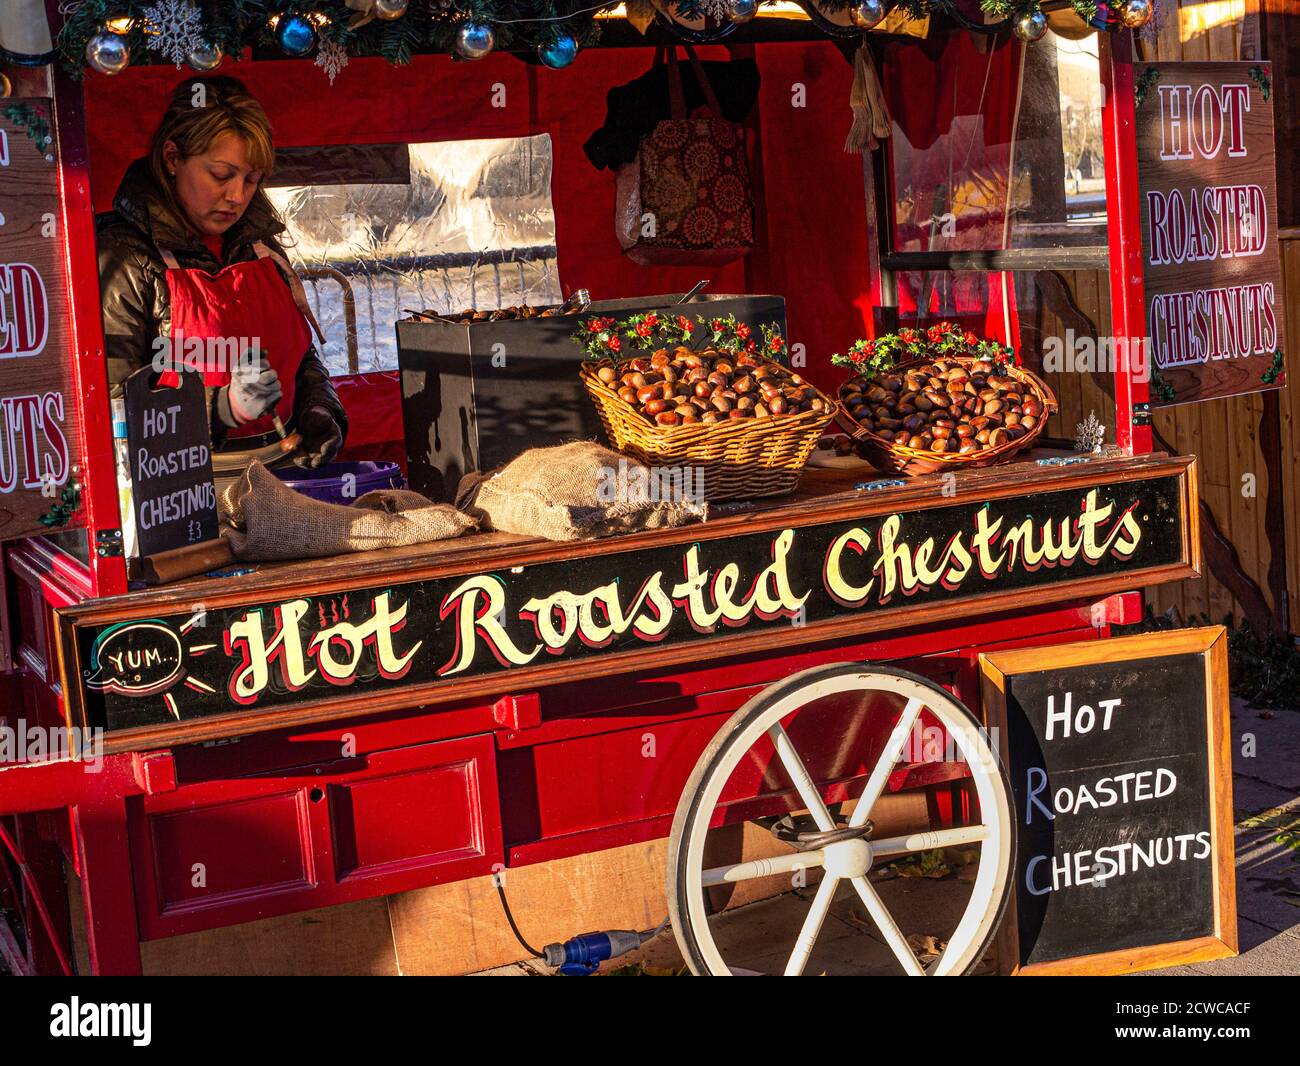 ROASTED CHESTNUTS Traditional Christmas winter market stall 'Hot Roasted Chestnuts' South Bank London UK Stock Photo